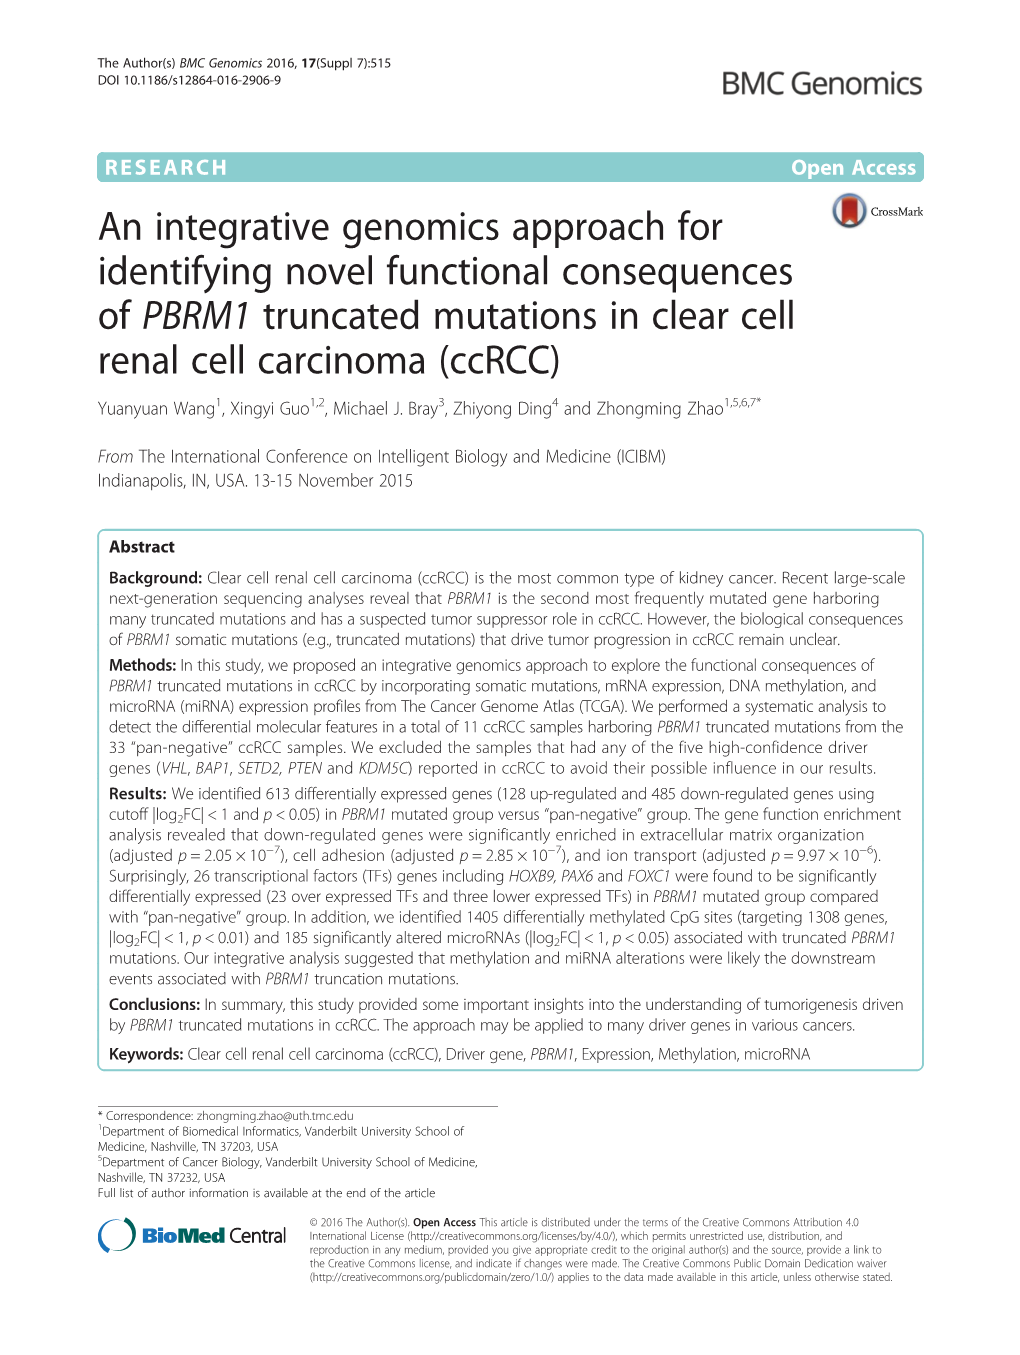 An Integrative Genomics Approach for Identifying Novel Functional